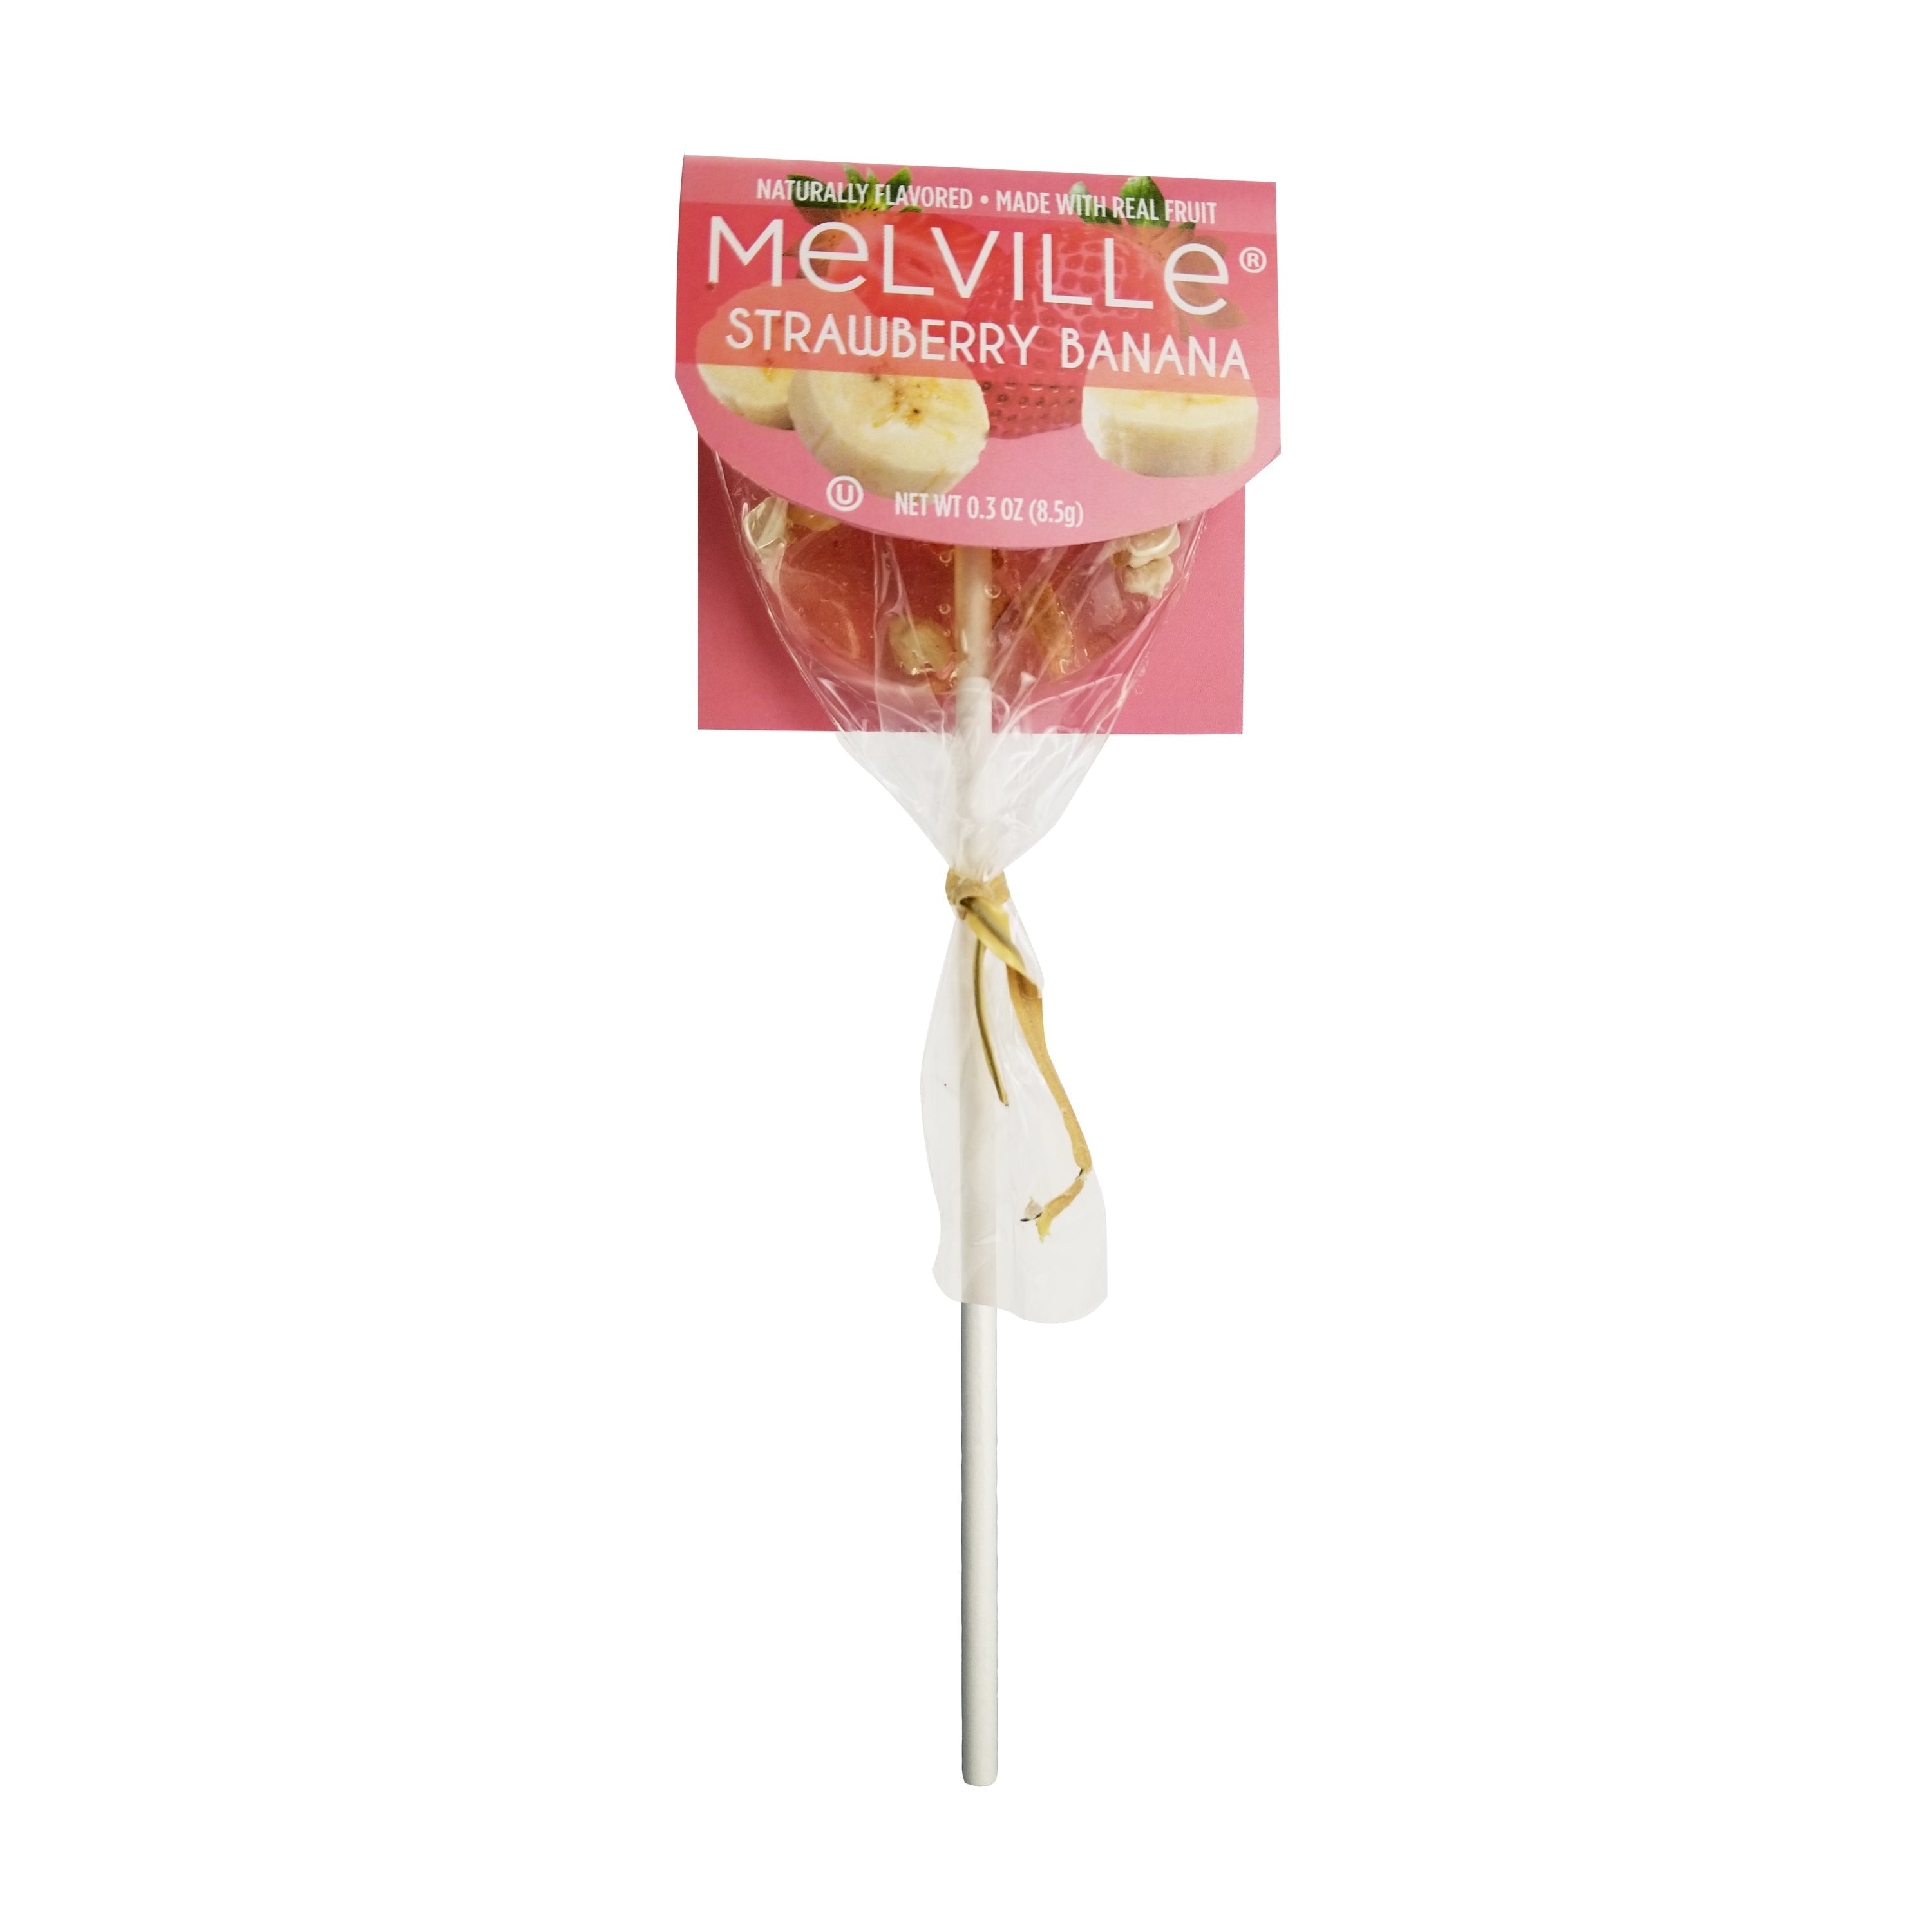 Gourmet Fruit Lollipops - Strawberry Banana by Melville Candy Company